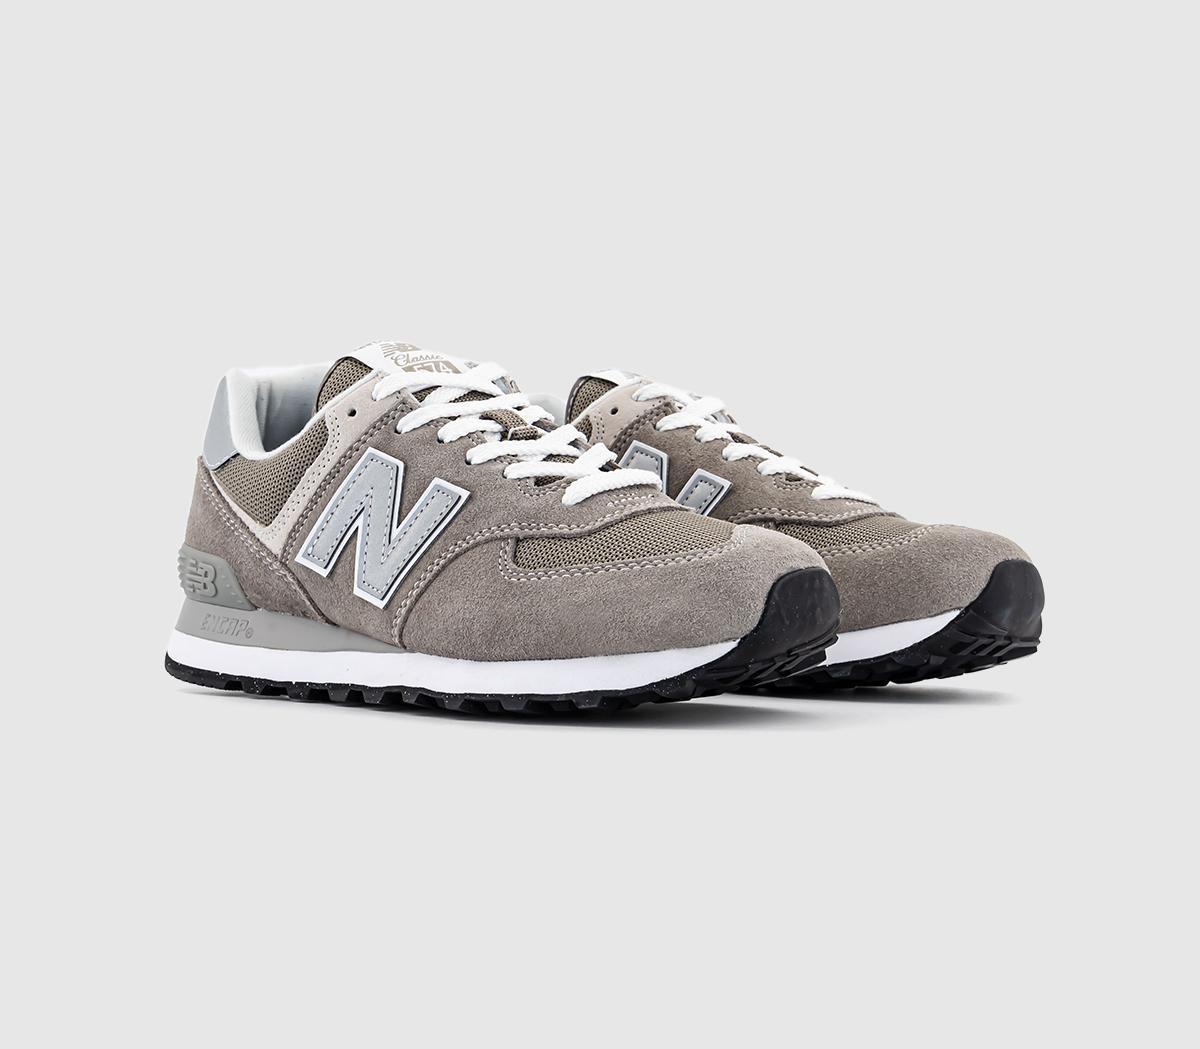 New Balance Mens 574 Trainers Grey White Green Leaf Rubber, 8